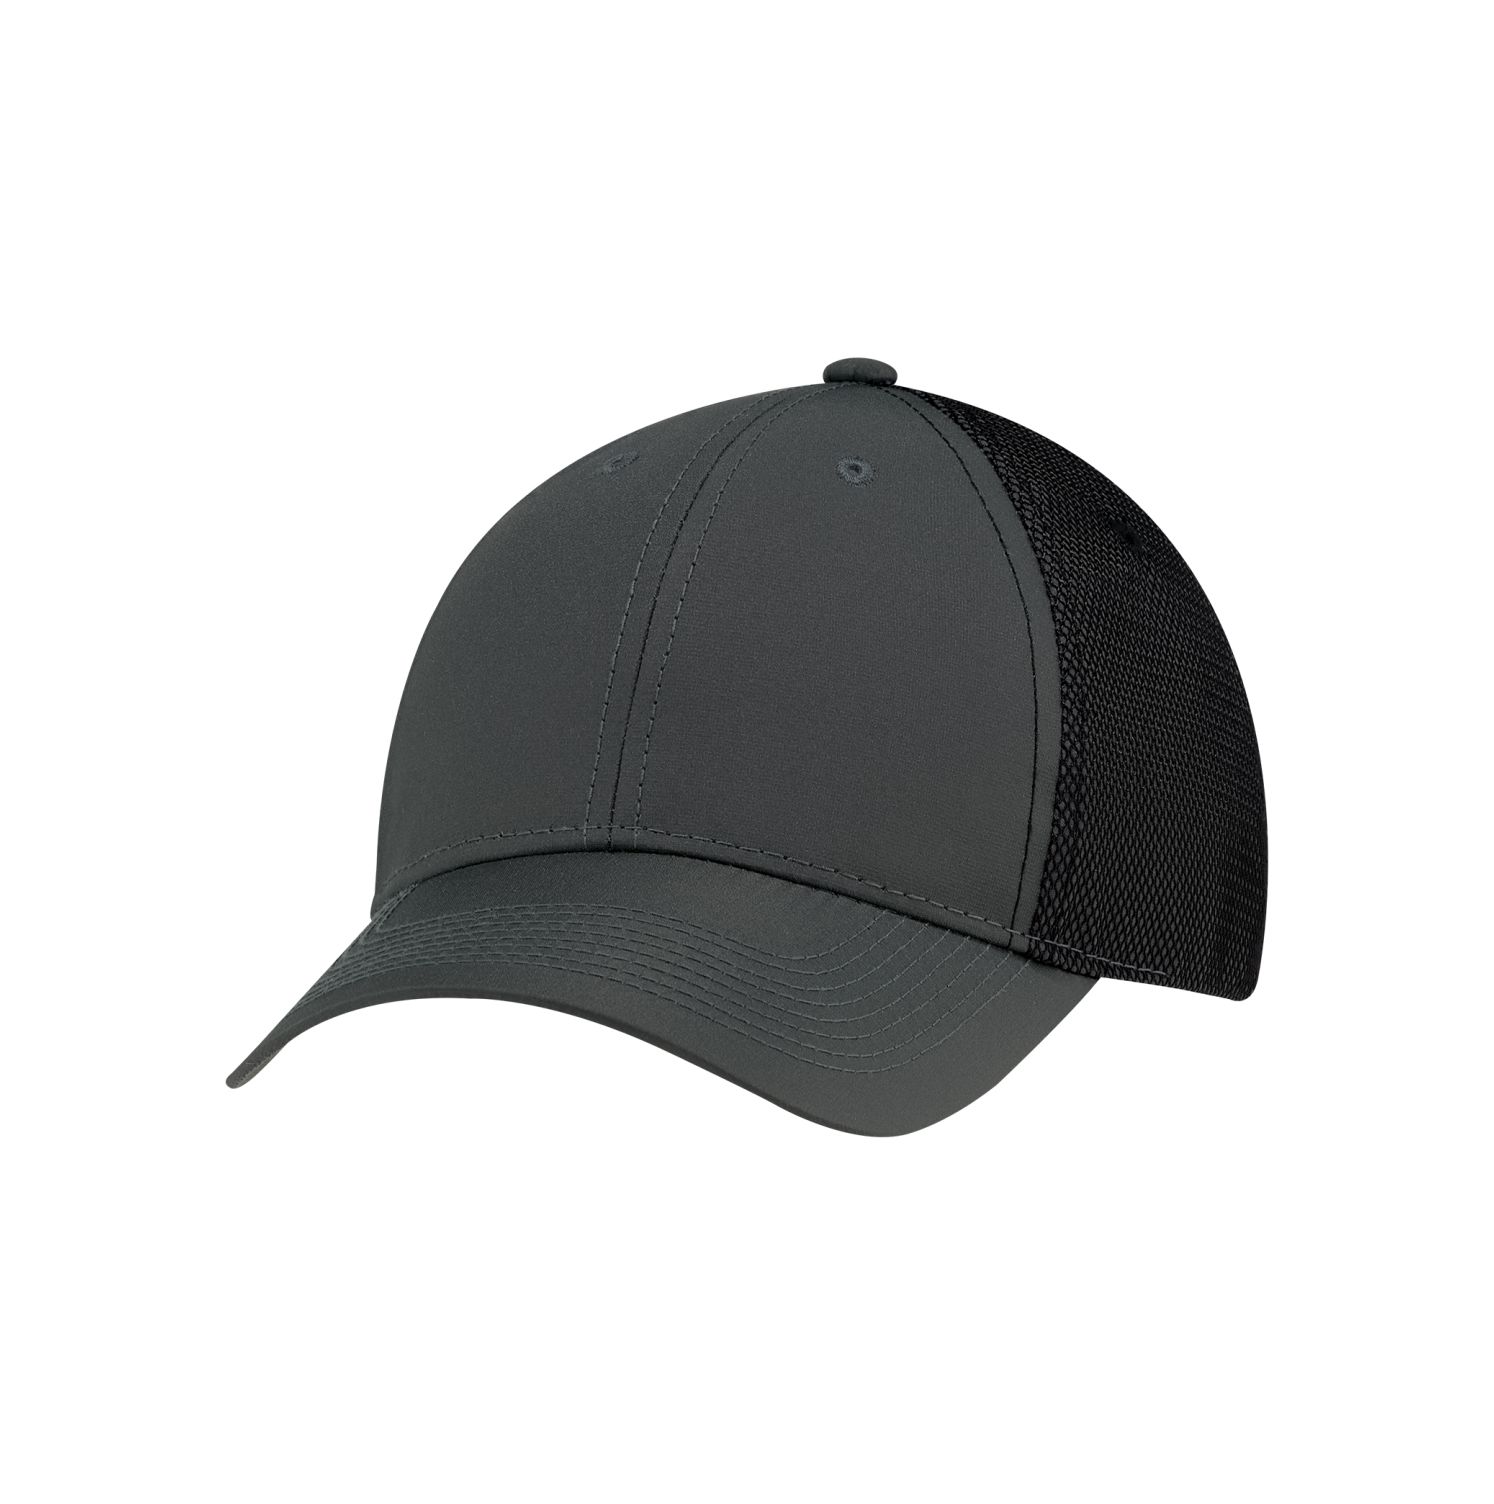 AJM Polyester Rip Stop / Polyester Rip Stop Bonded Mesh 6 Panel Constructed Full-Fit Hat #1B637M Charcoal / Black